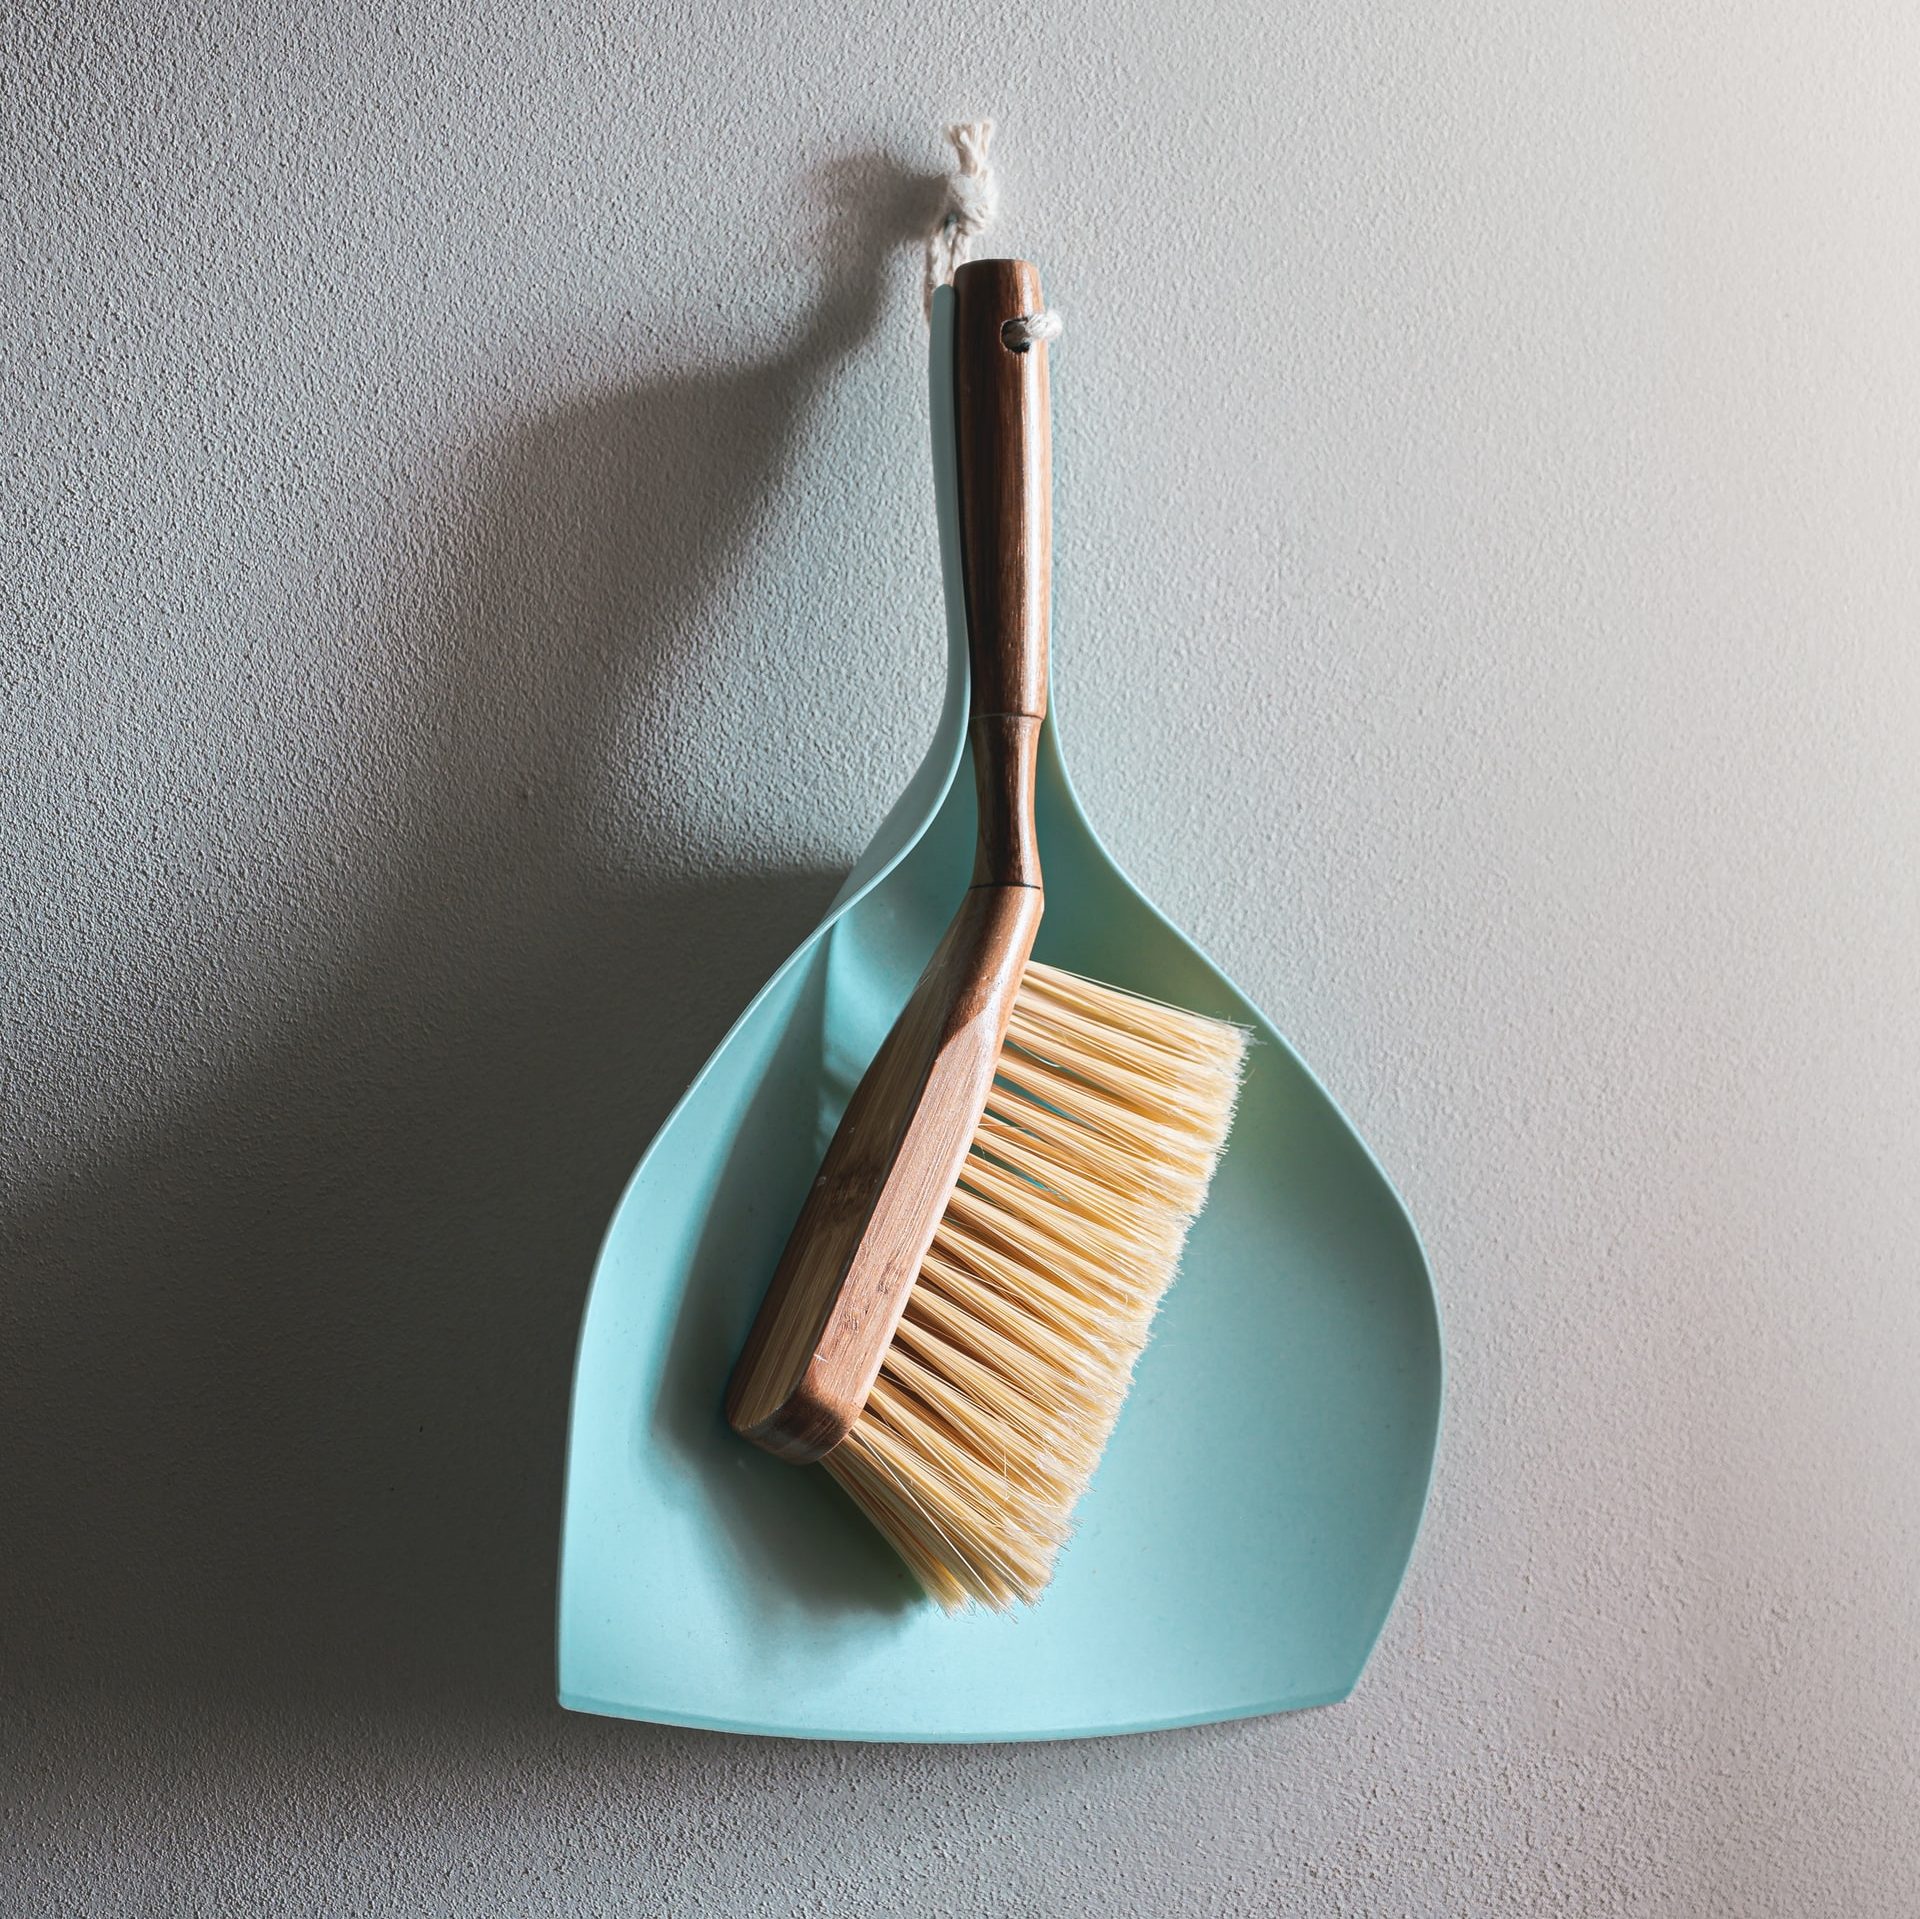 Handheld dust broom with a teal dustpan